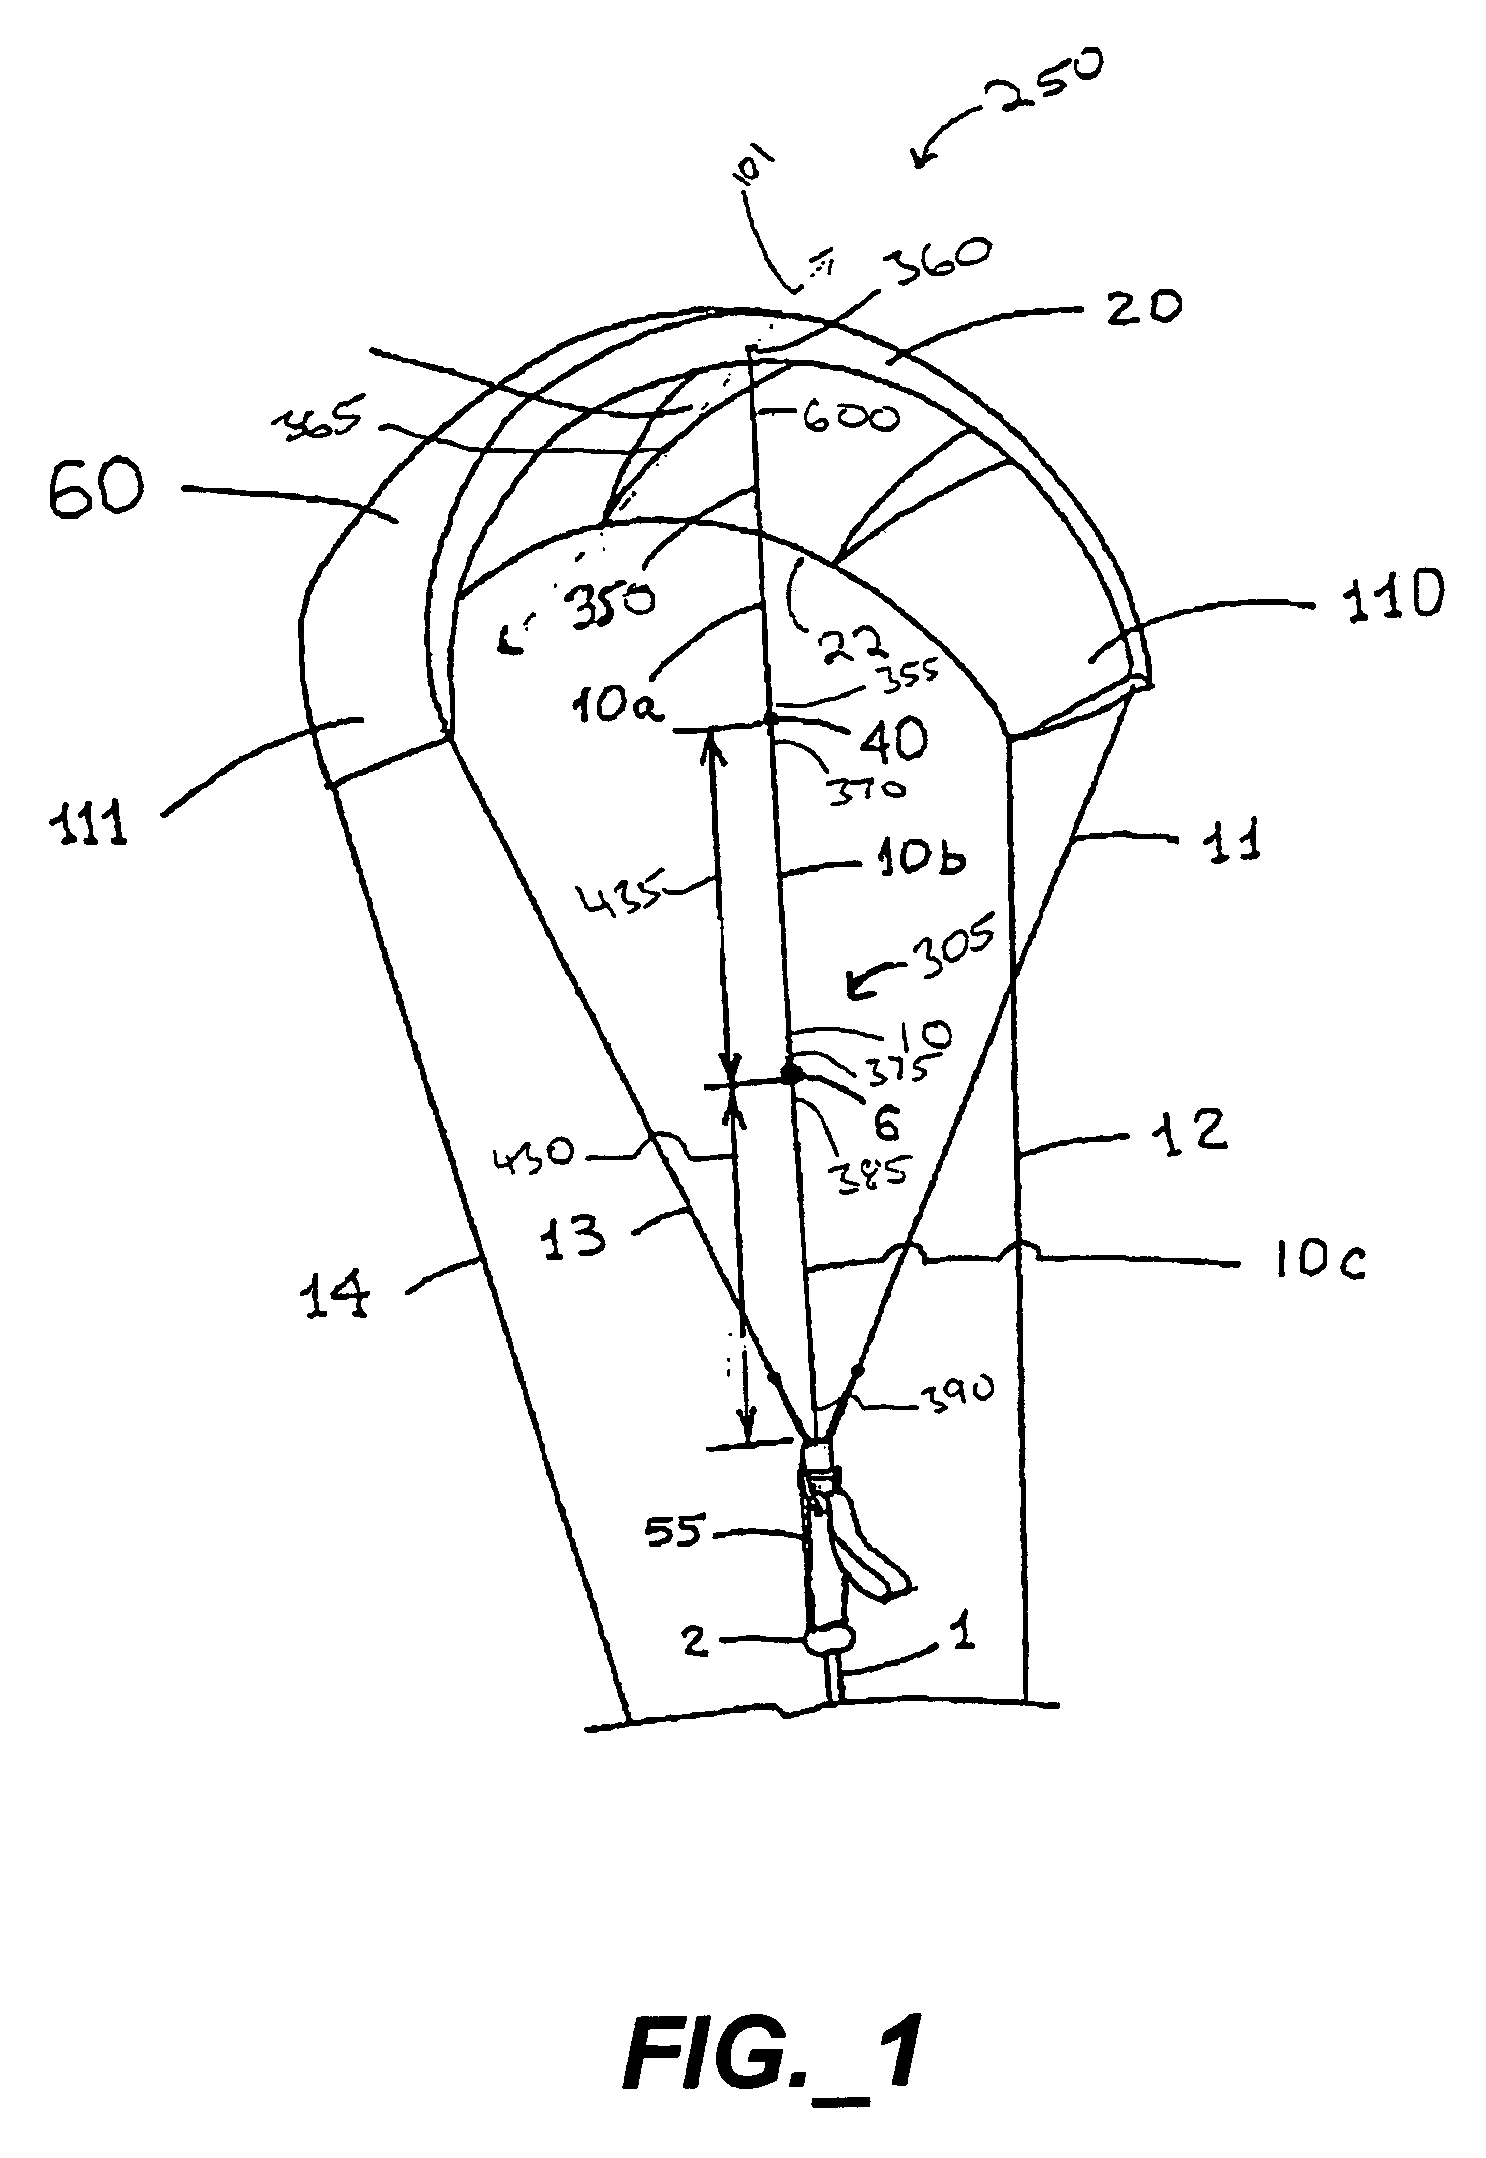 Kite safety, control, and rapid depowering apparatus